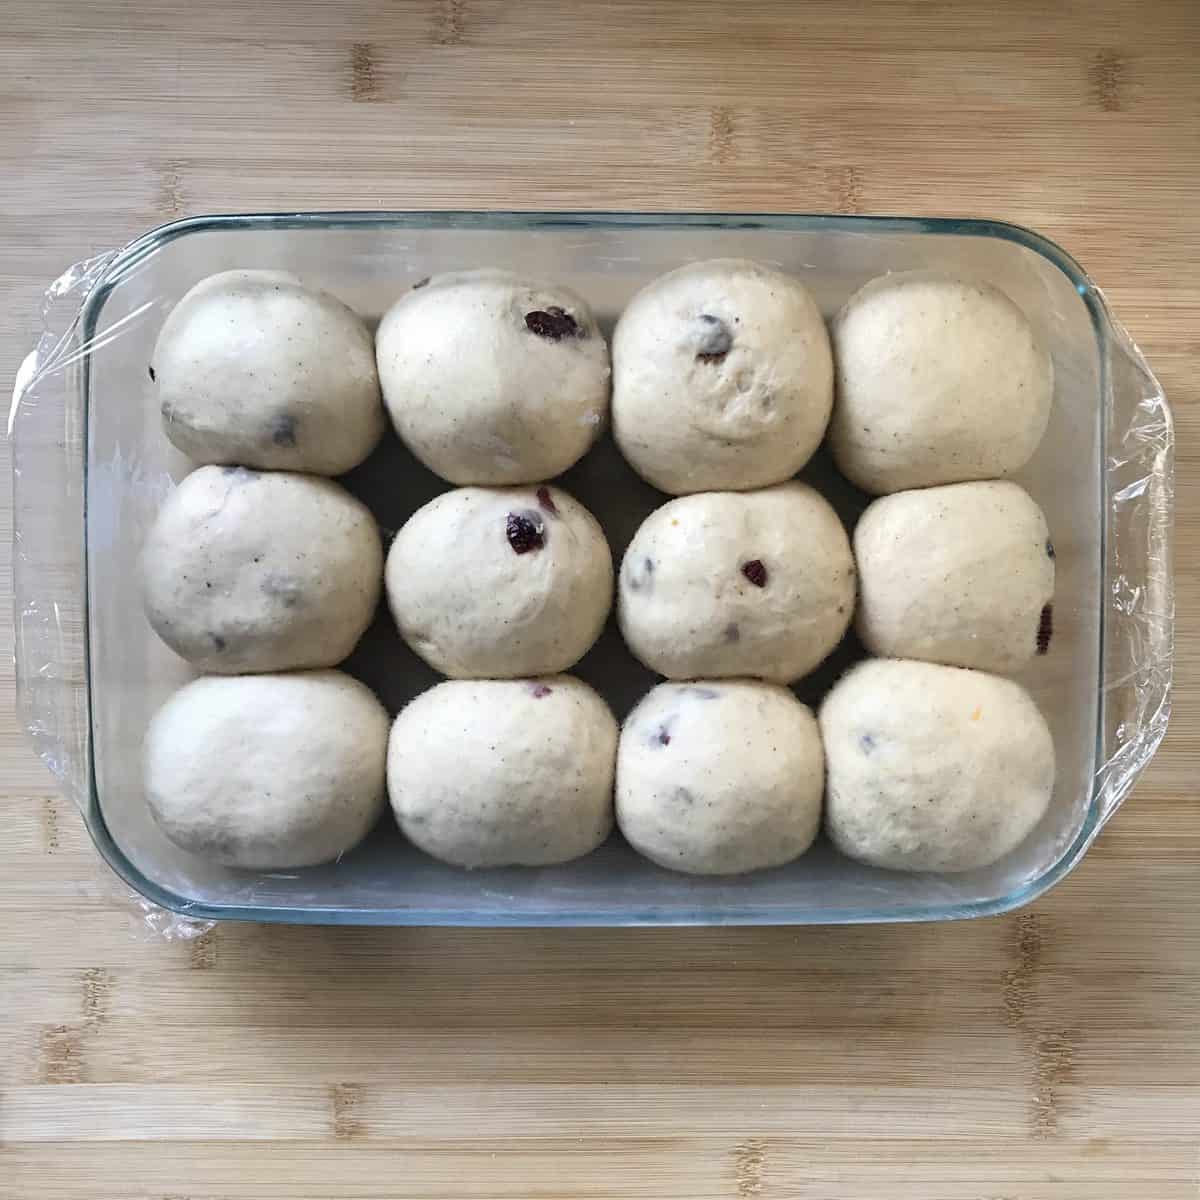 Hot cross buns have doubled in size. 